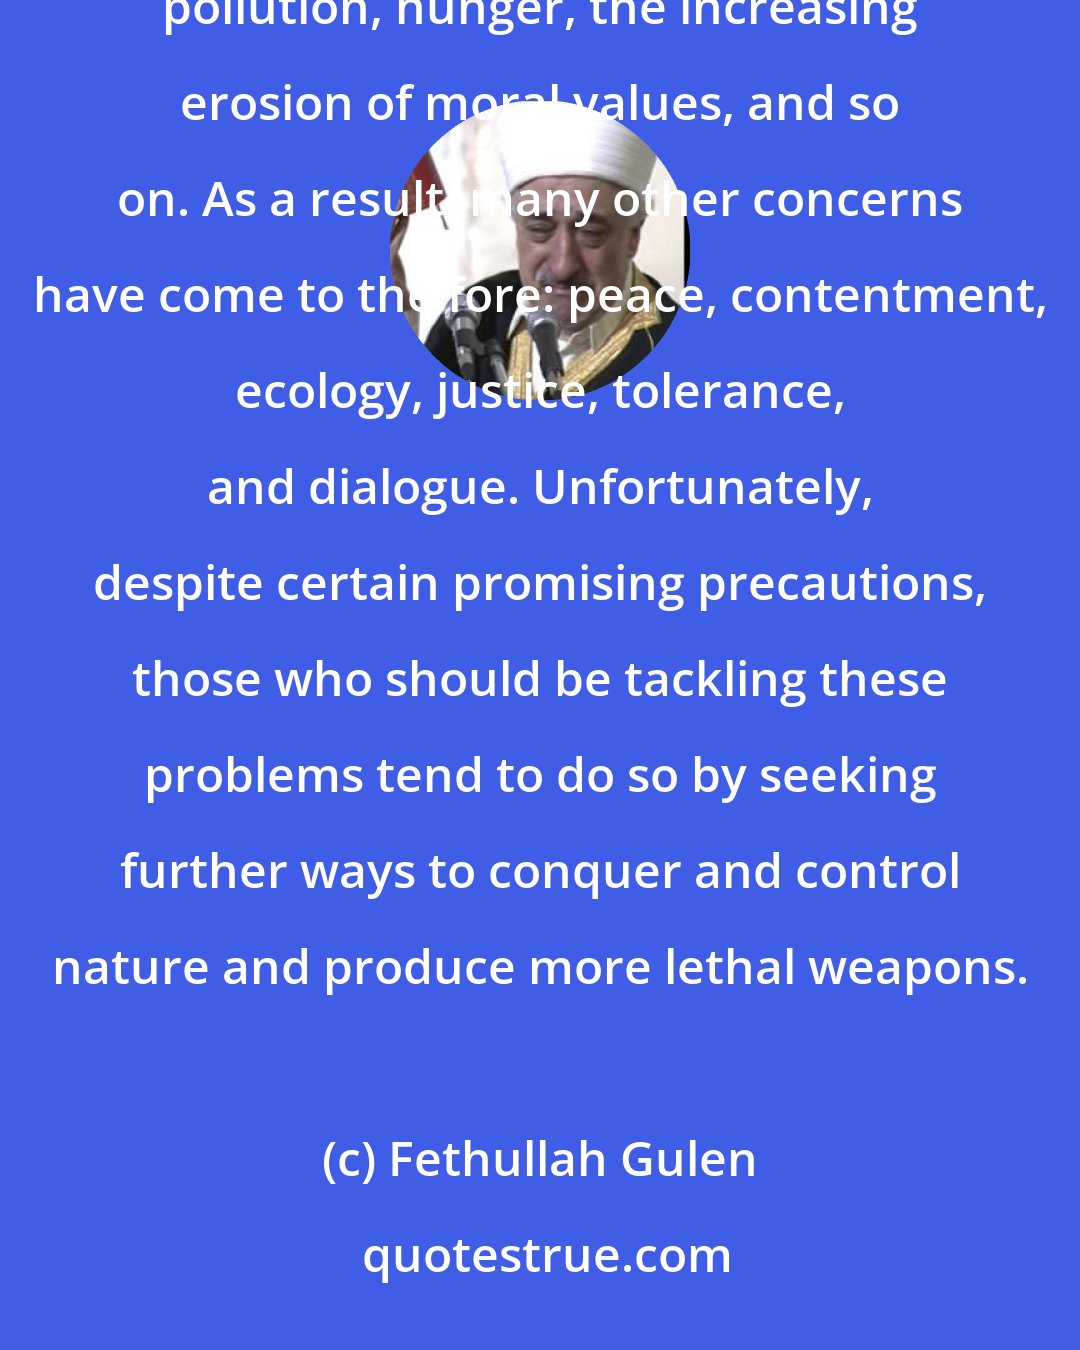 Fethullah Gulen: Today, people are talking about many things: the danger of war and frequent clashes, water and air pollution, hunger, the increasing erosion of moral values, and so on. As a result, many other concerns have come to the fore: peace, contentment, ecology, justice, tolerance, and dialogue. Unfortunately, despite certain promising precautions, those who should be tackling these problems tend to do so by seeking further ways to conquer and control nature and produce more lethal weapons.